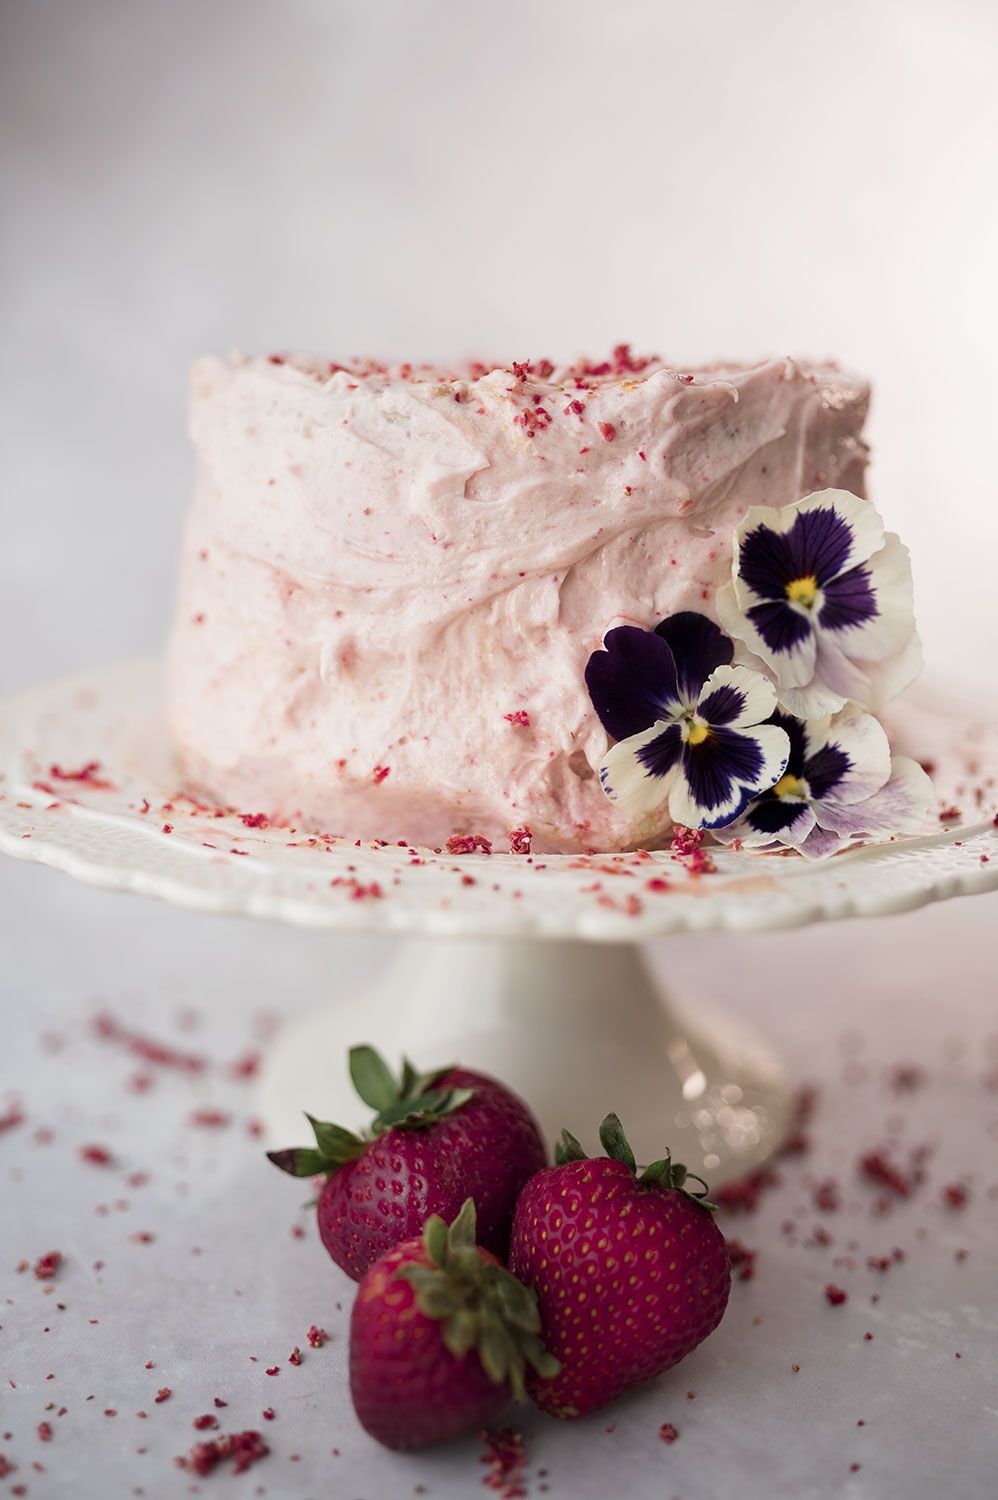 a pink frosted cake on a lacy white cake plate with fresh strawberries